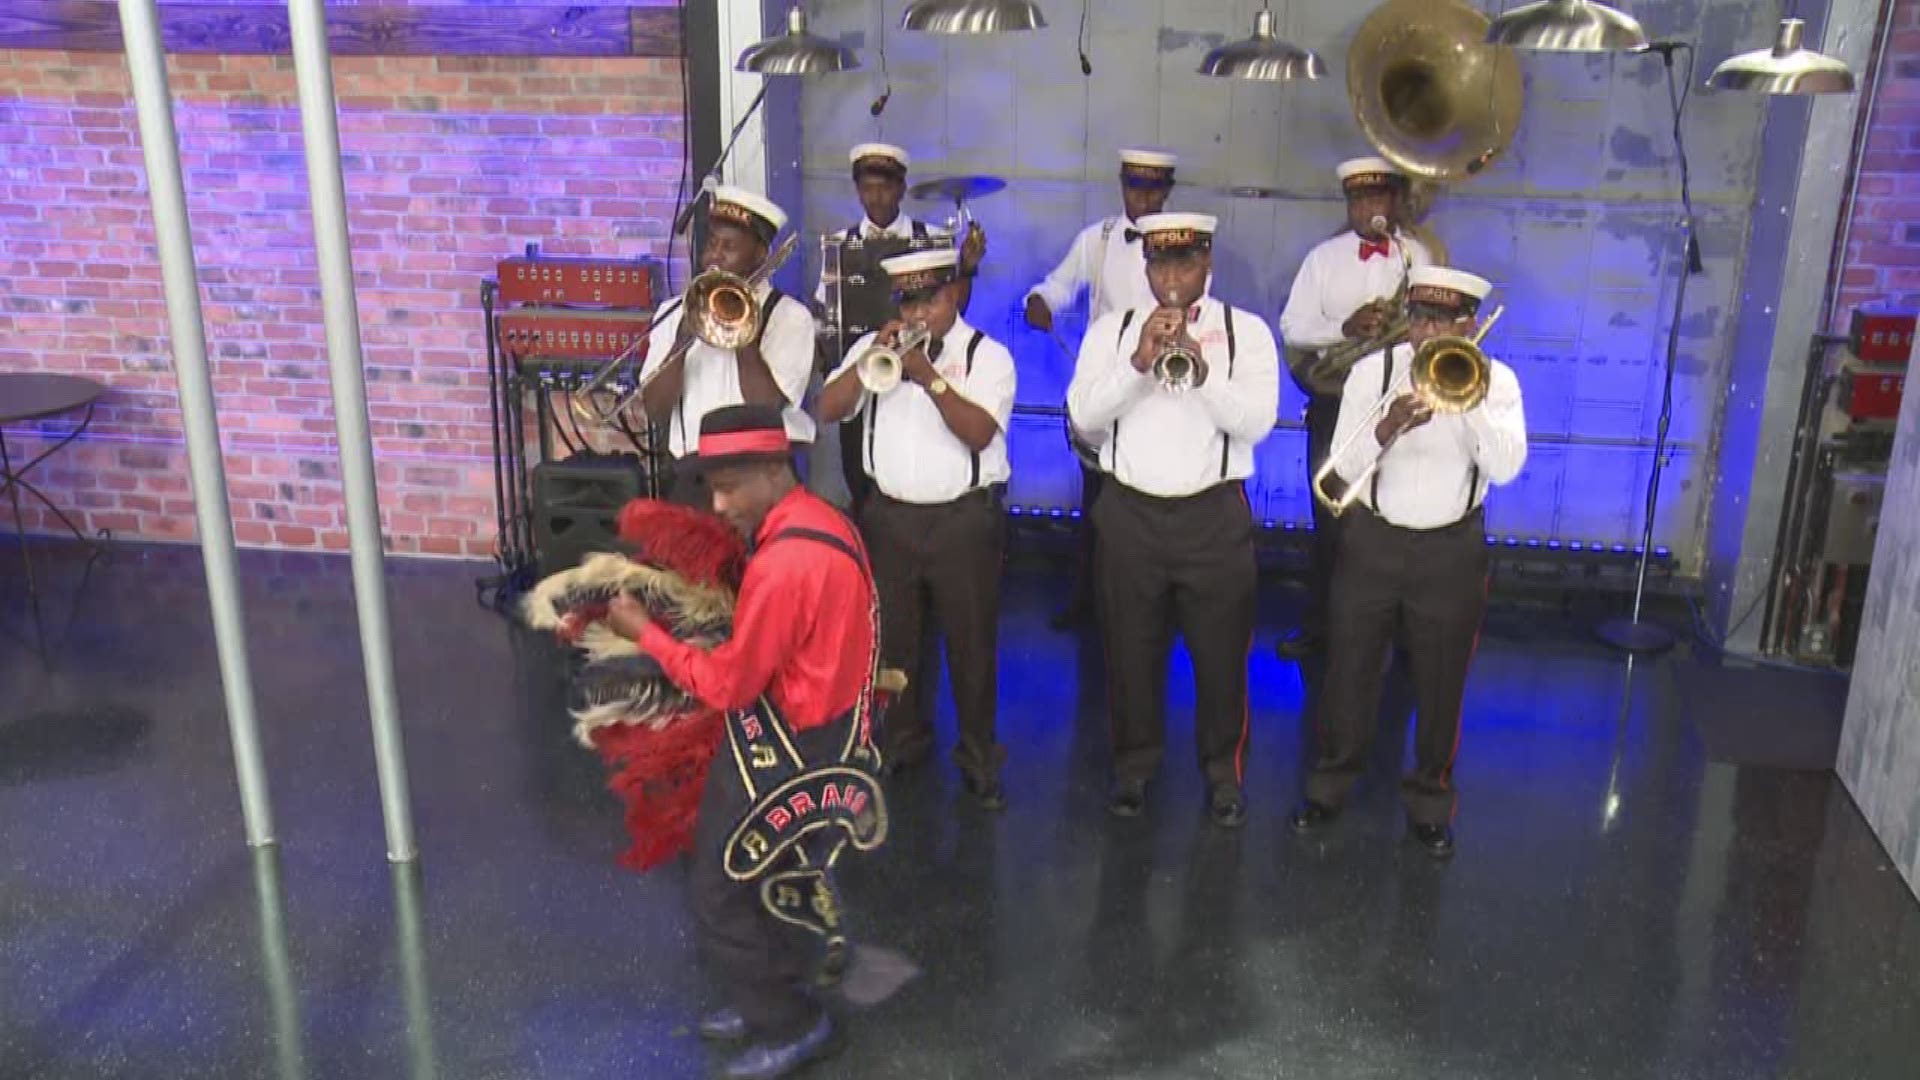 The Kinfolk Brass Band is performing at the annual Love in the Garden event at the New Orleans Museum of Art this Friday night inside the Sculpture Garden.